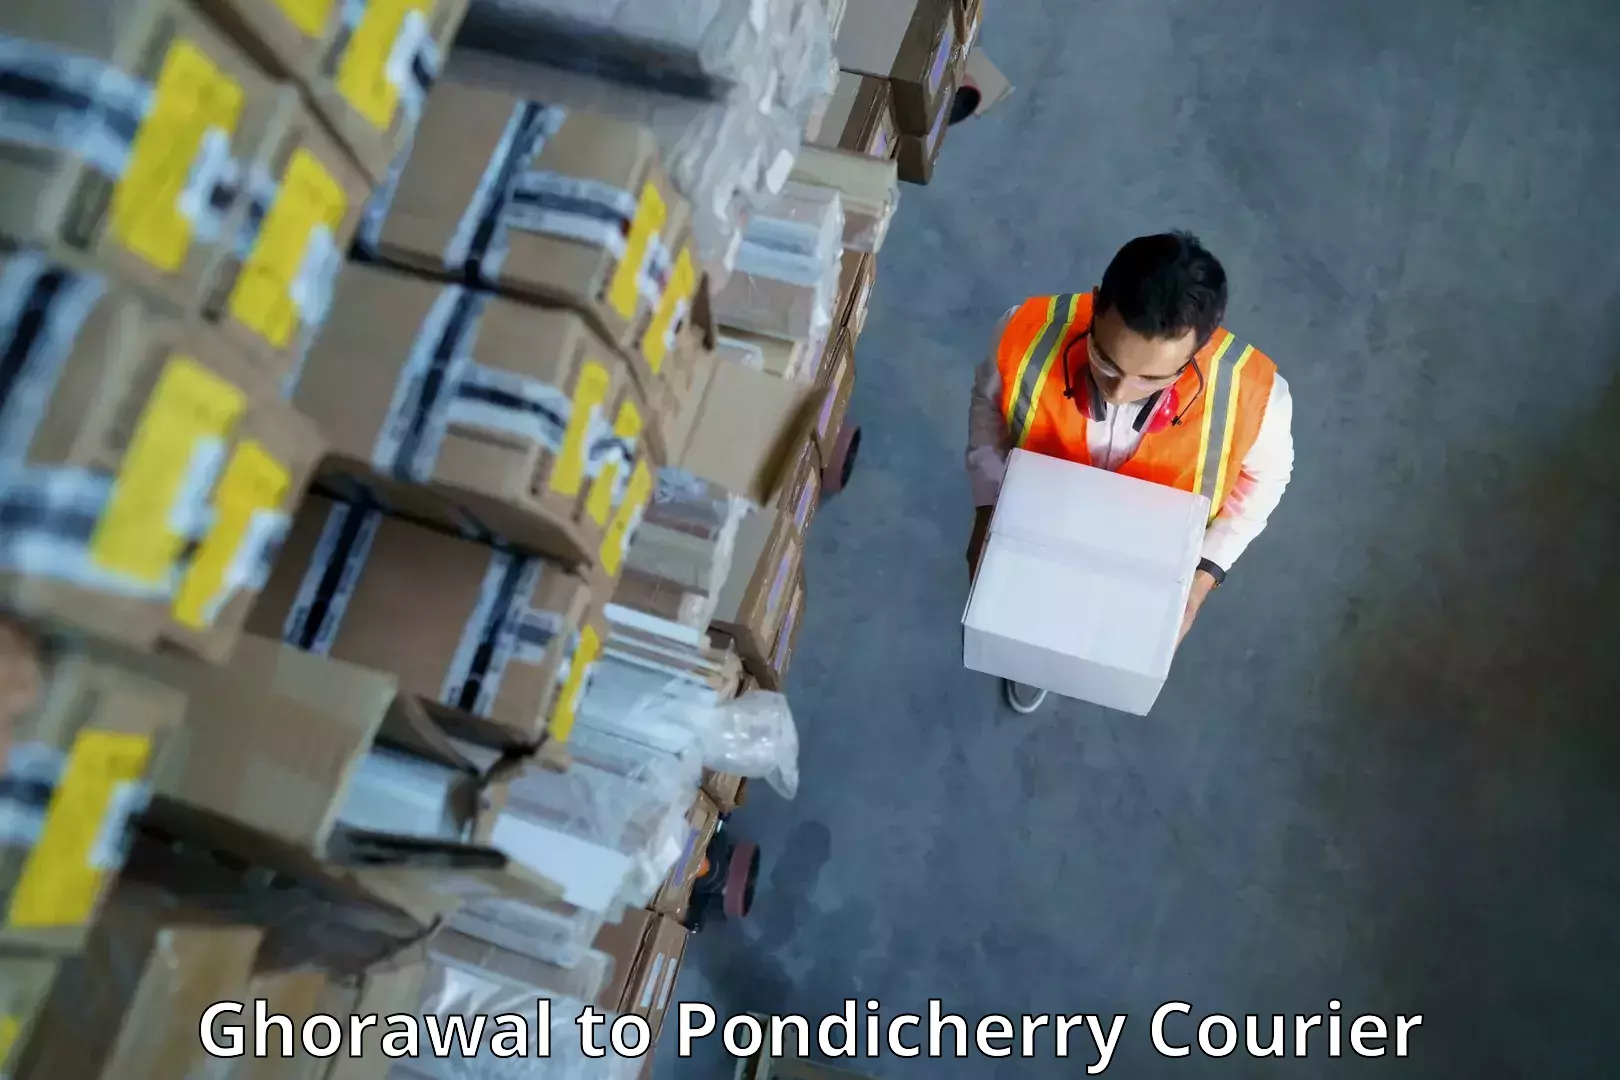 24/7 courier service Ghorawal to Pondicherry University